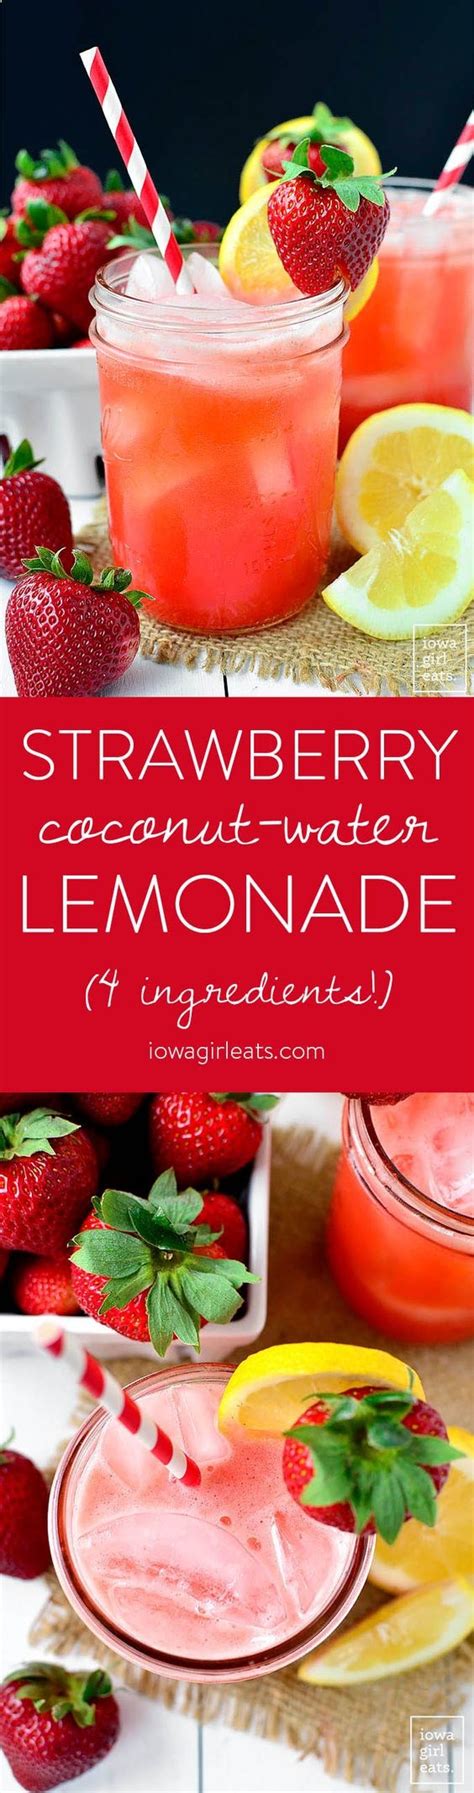 Here are delicious coconut drink recipes that will transport you to a beachy destination with each sip. Strawberry Coconut Water Lemonade is a sweet-tart summery drink recipe made with fresh ...